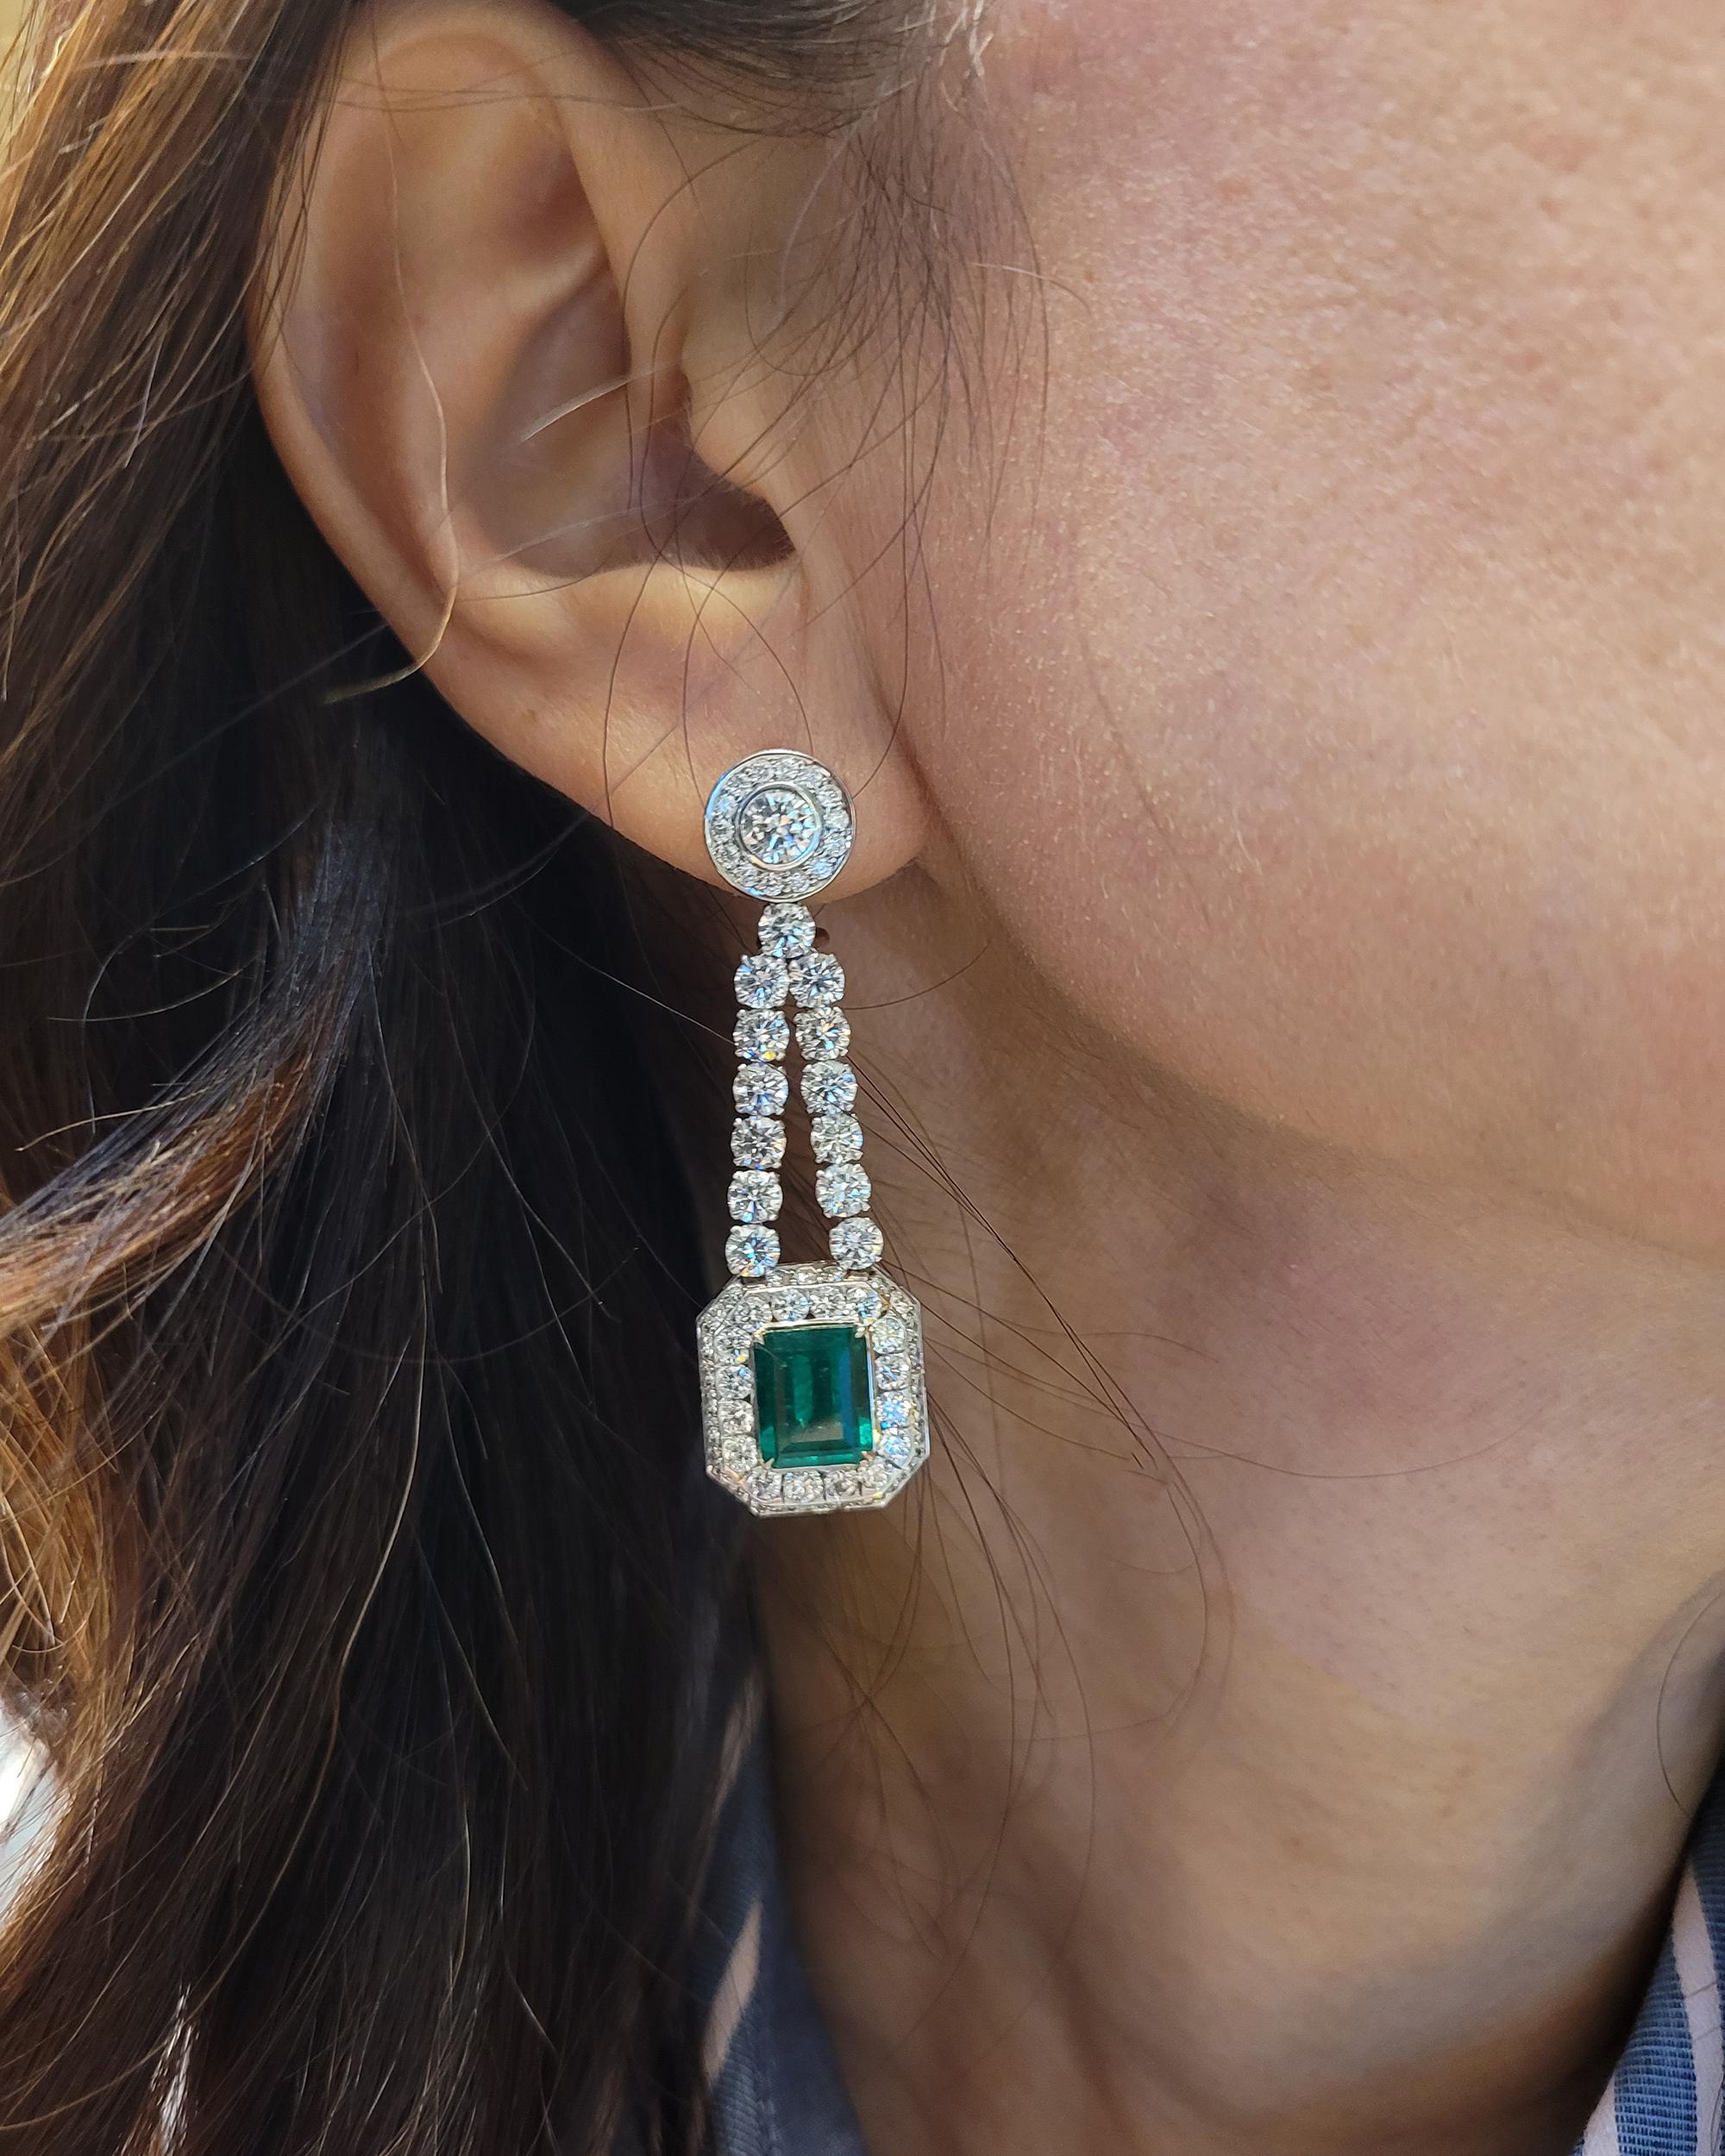 A Muzo emerald is an exclusive variety of emerald sourced from the emerald mine of the same name in Colombia, which is arguably the leading producer of excellent quality emerald gemstones the world over. This is often confused with “Muzo green”